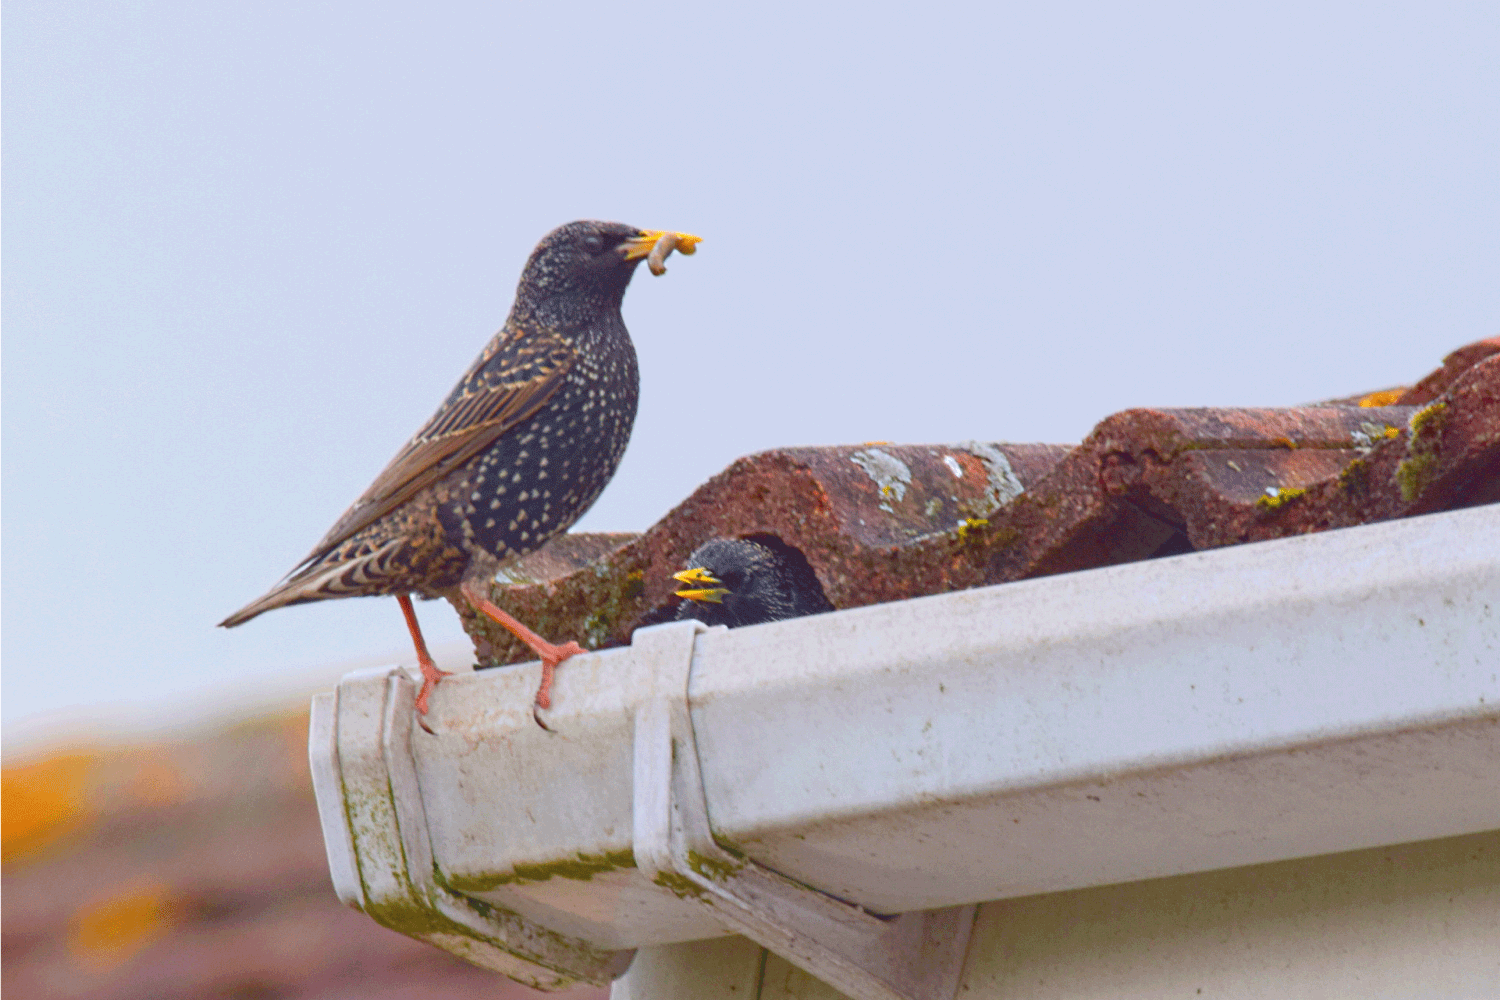 Pair of starling birds close up nesting in roof